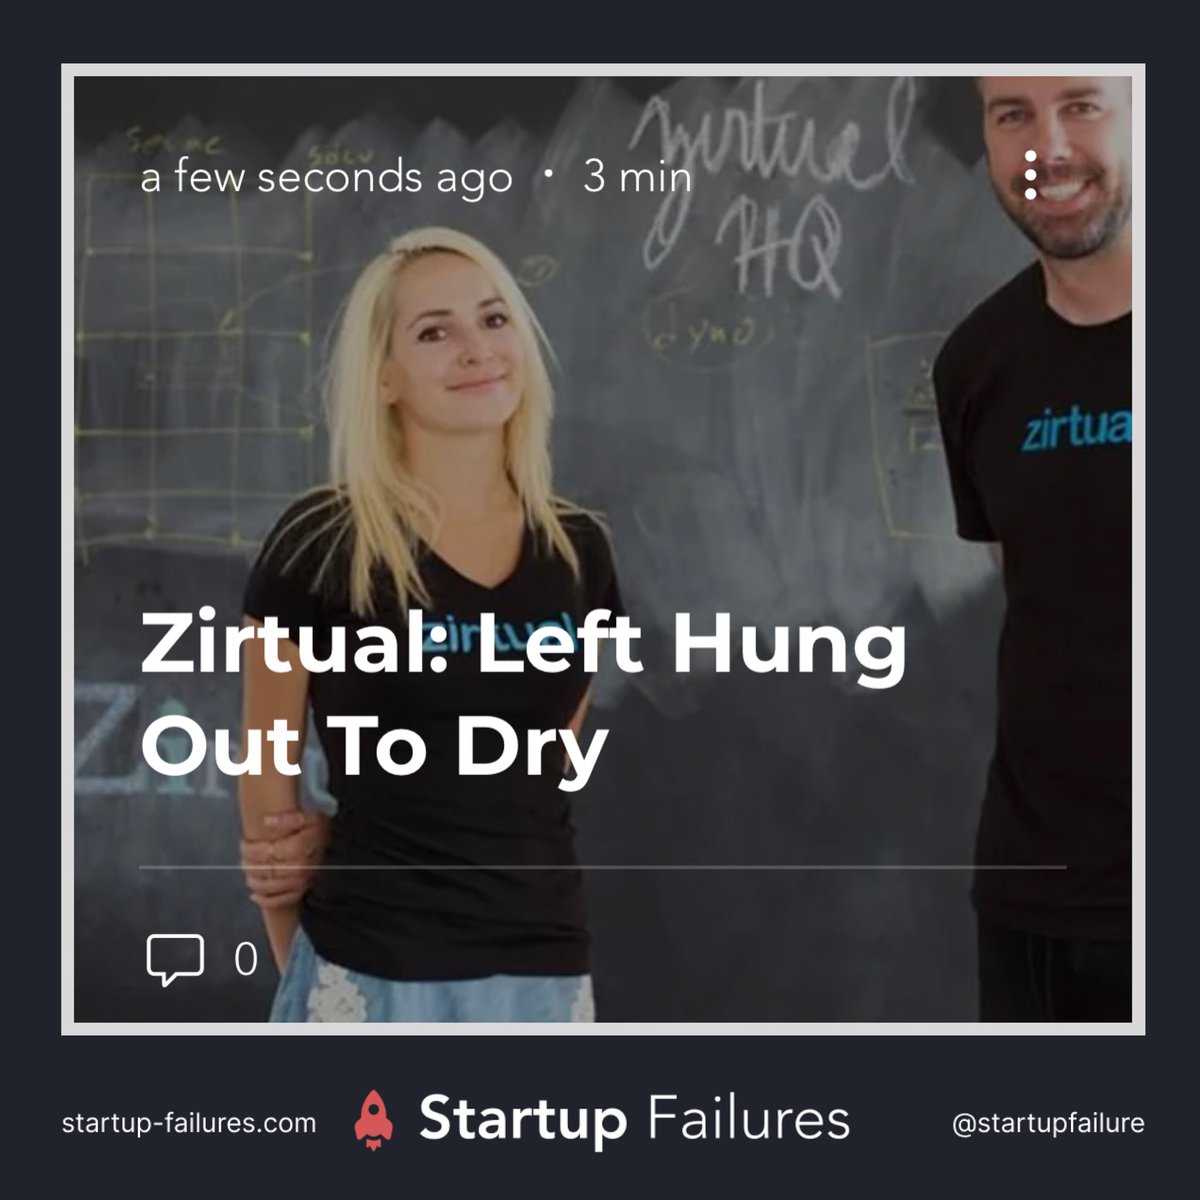 🎉Today’s article is out now: startup-failures.com/post/zirtual-l…

Weekly blog & newsletter: startup-failures.com

#startupfailures #startupfail #startupblog #startupnewsletter #business #startup #foryoupage #foryou #fy